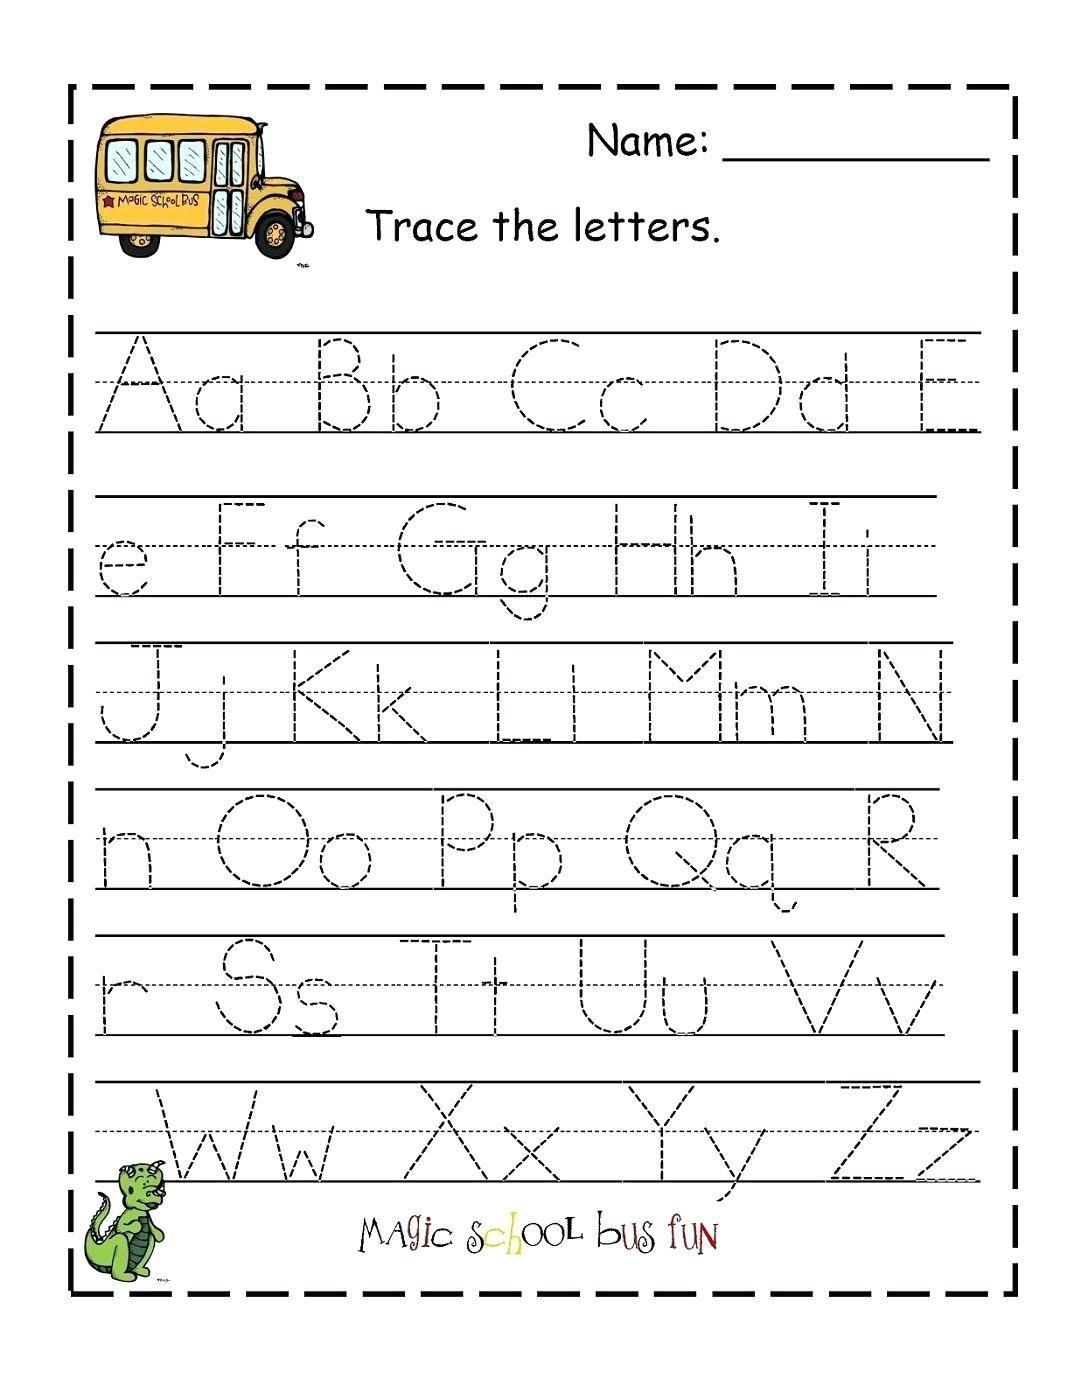 Awesome Alphabet Tracing Workbook That You Must Know, You&amp;#039;re